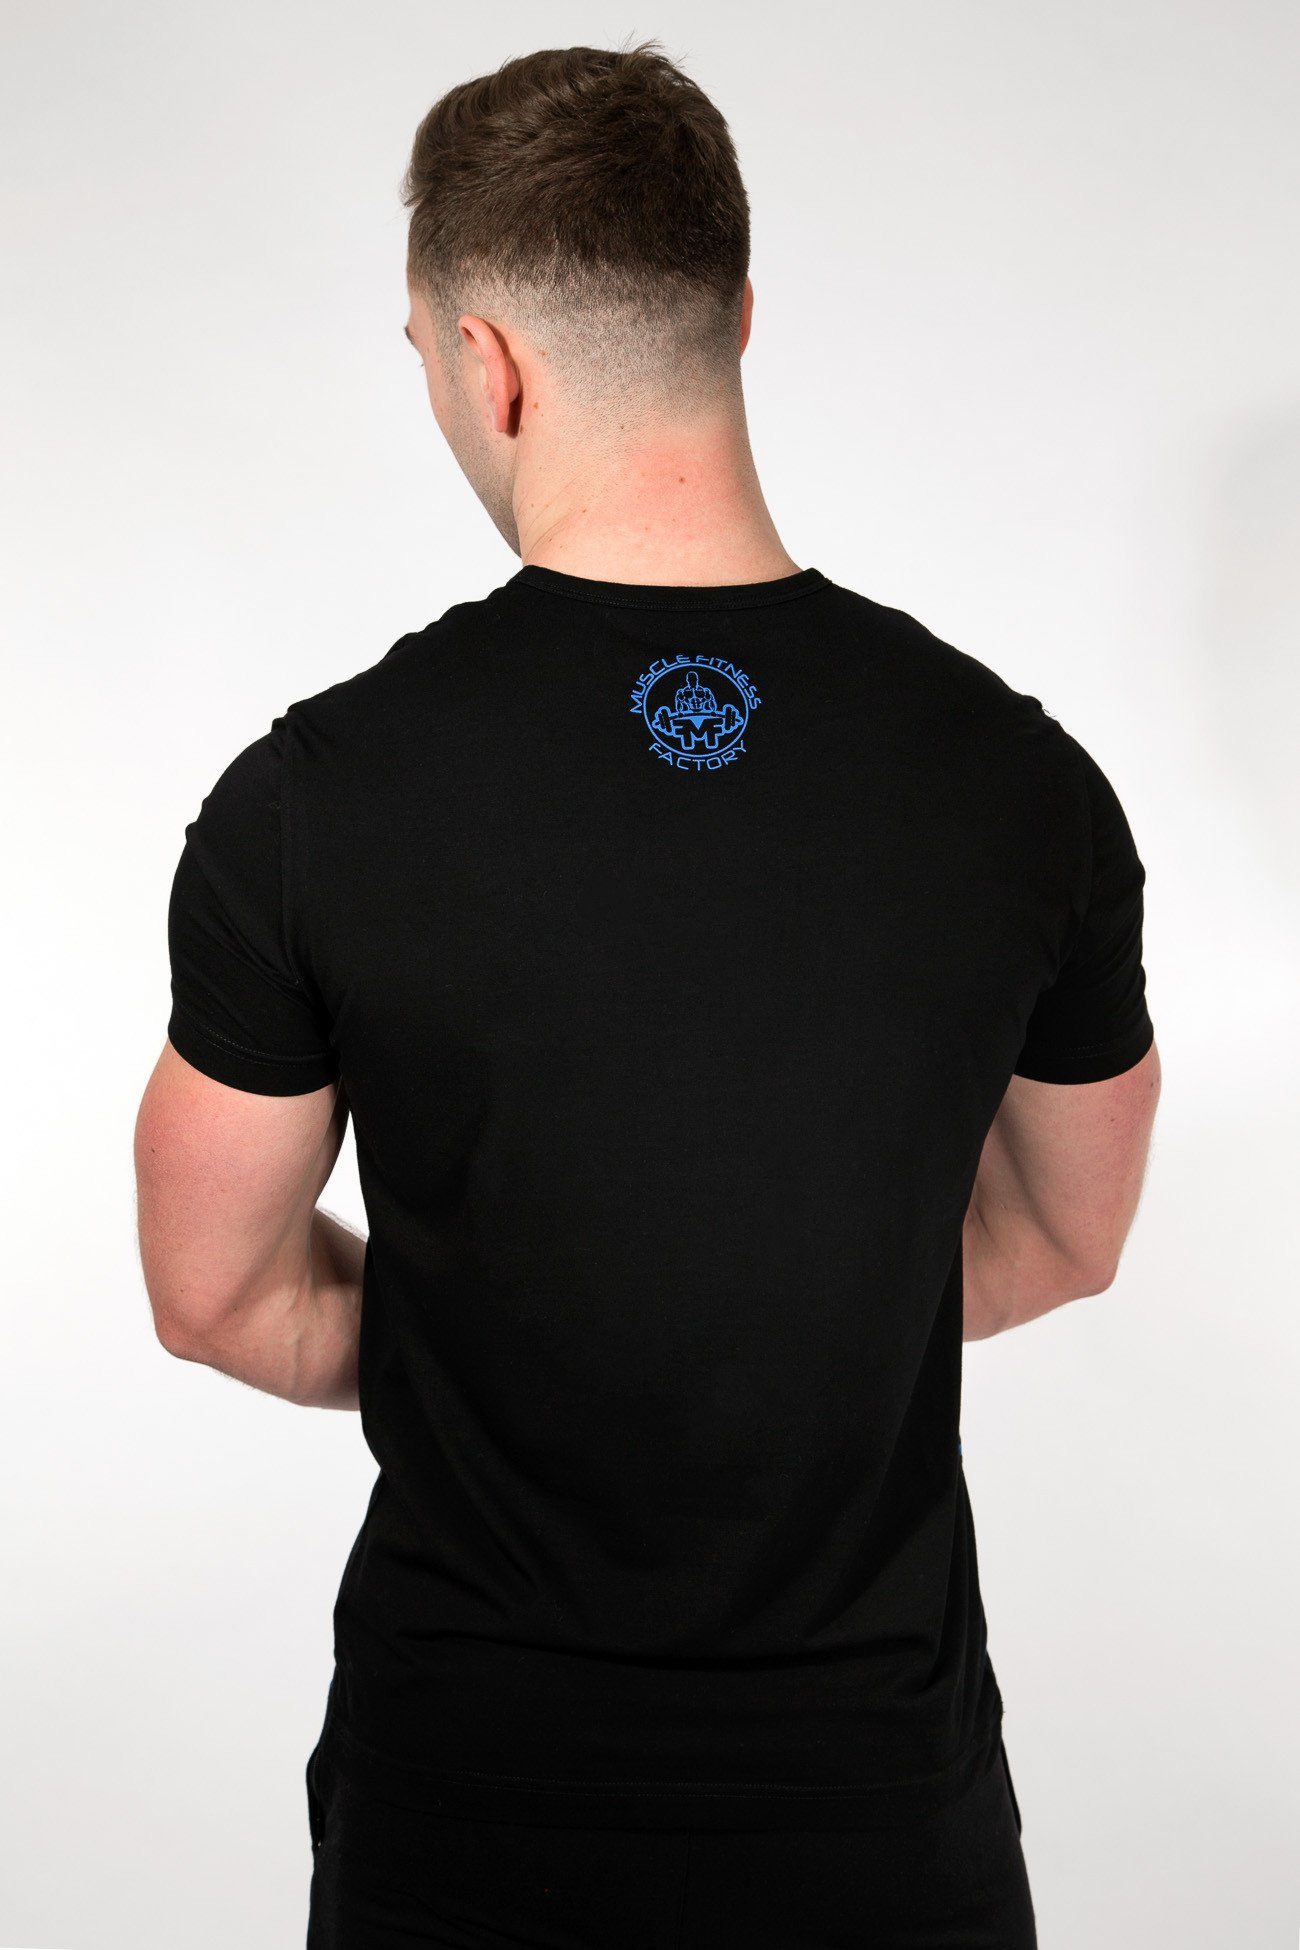 MFF Spartan T-Shirt Black/Blue - Muscle Fitness Factory